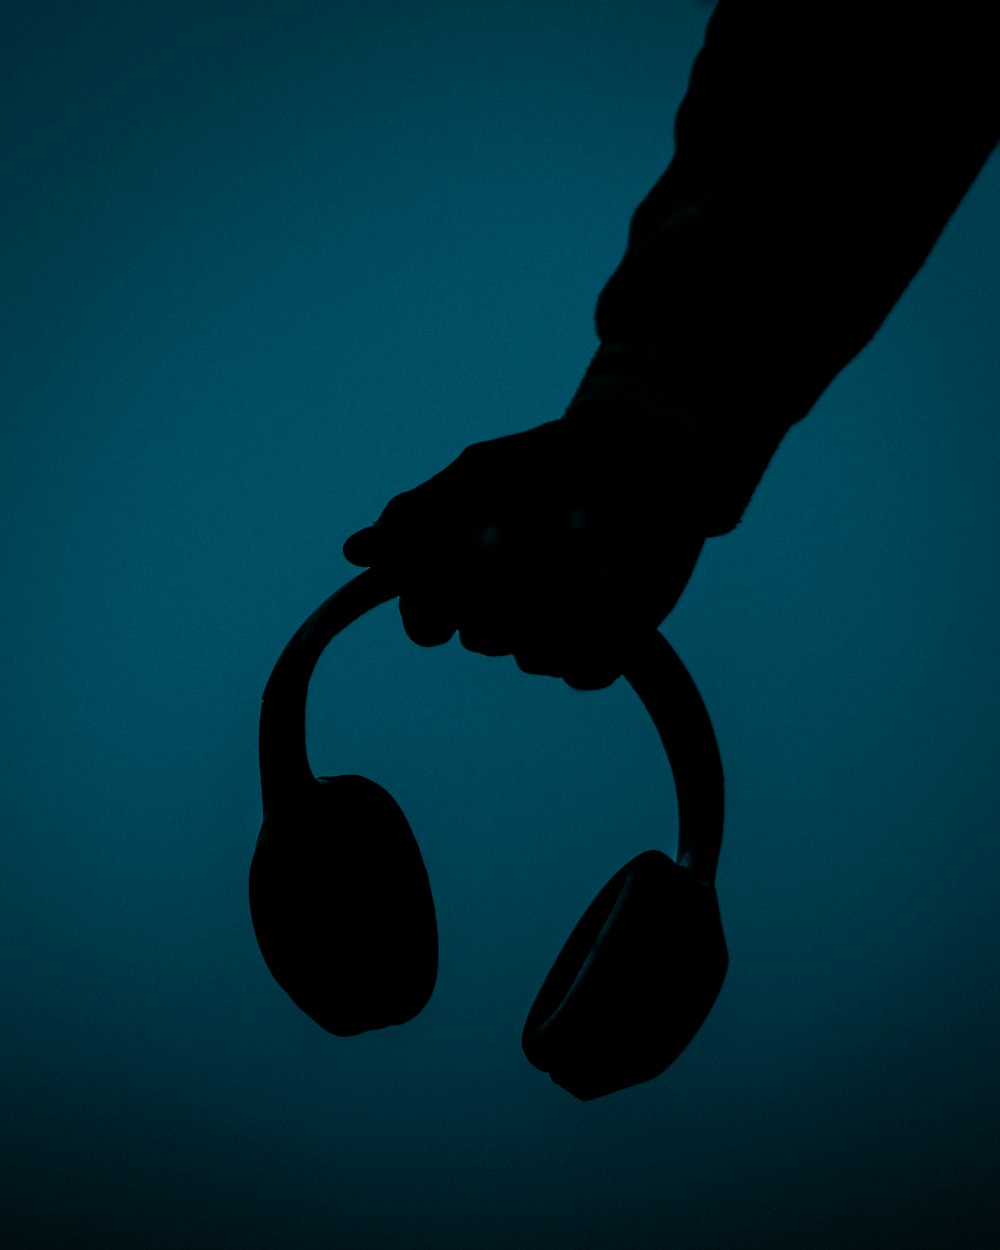 a silhouette of a person holding a pair of headphones